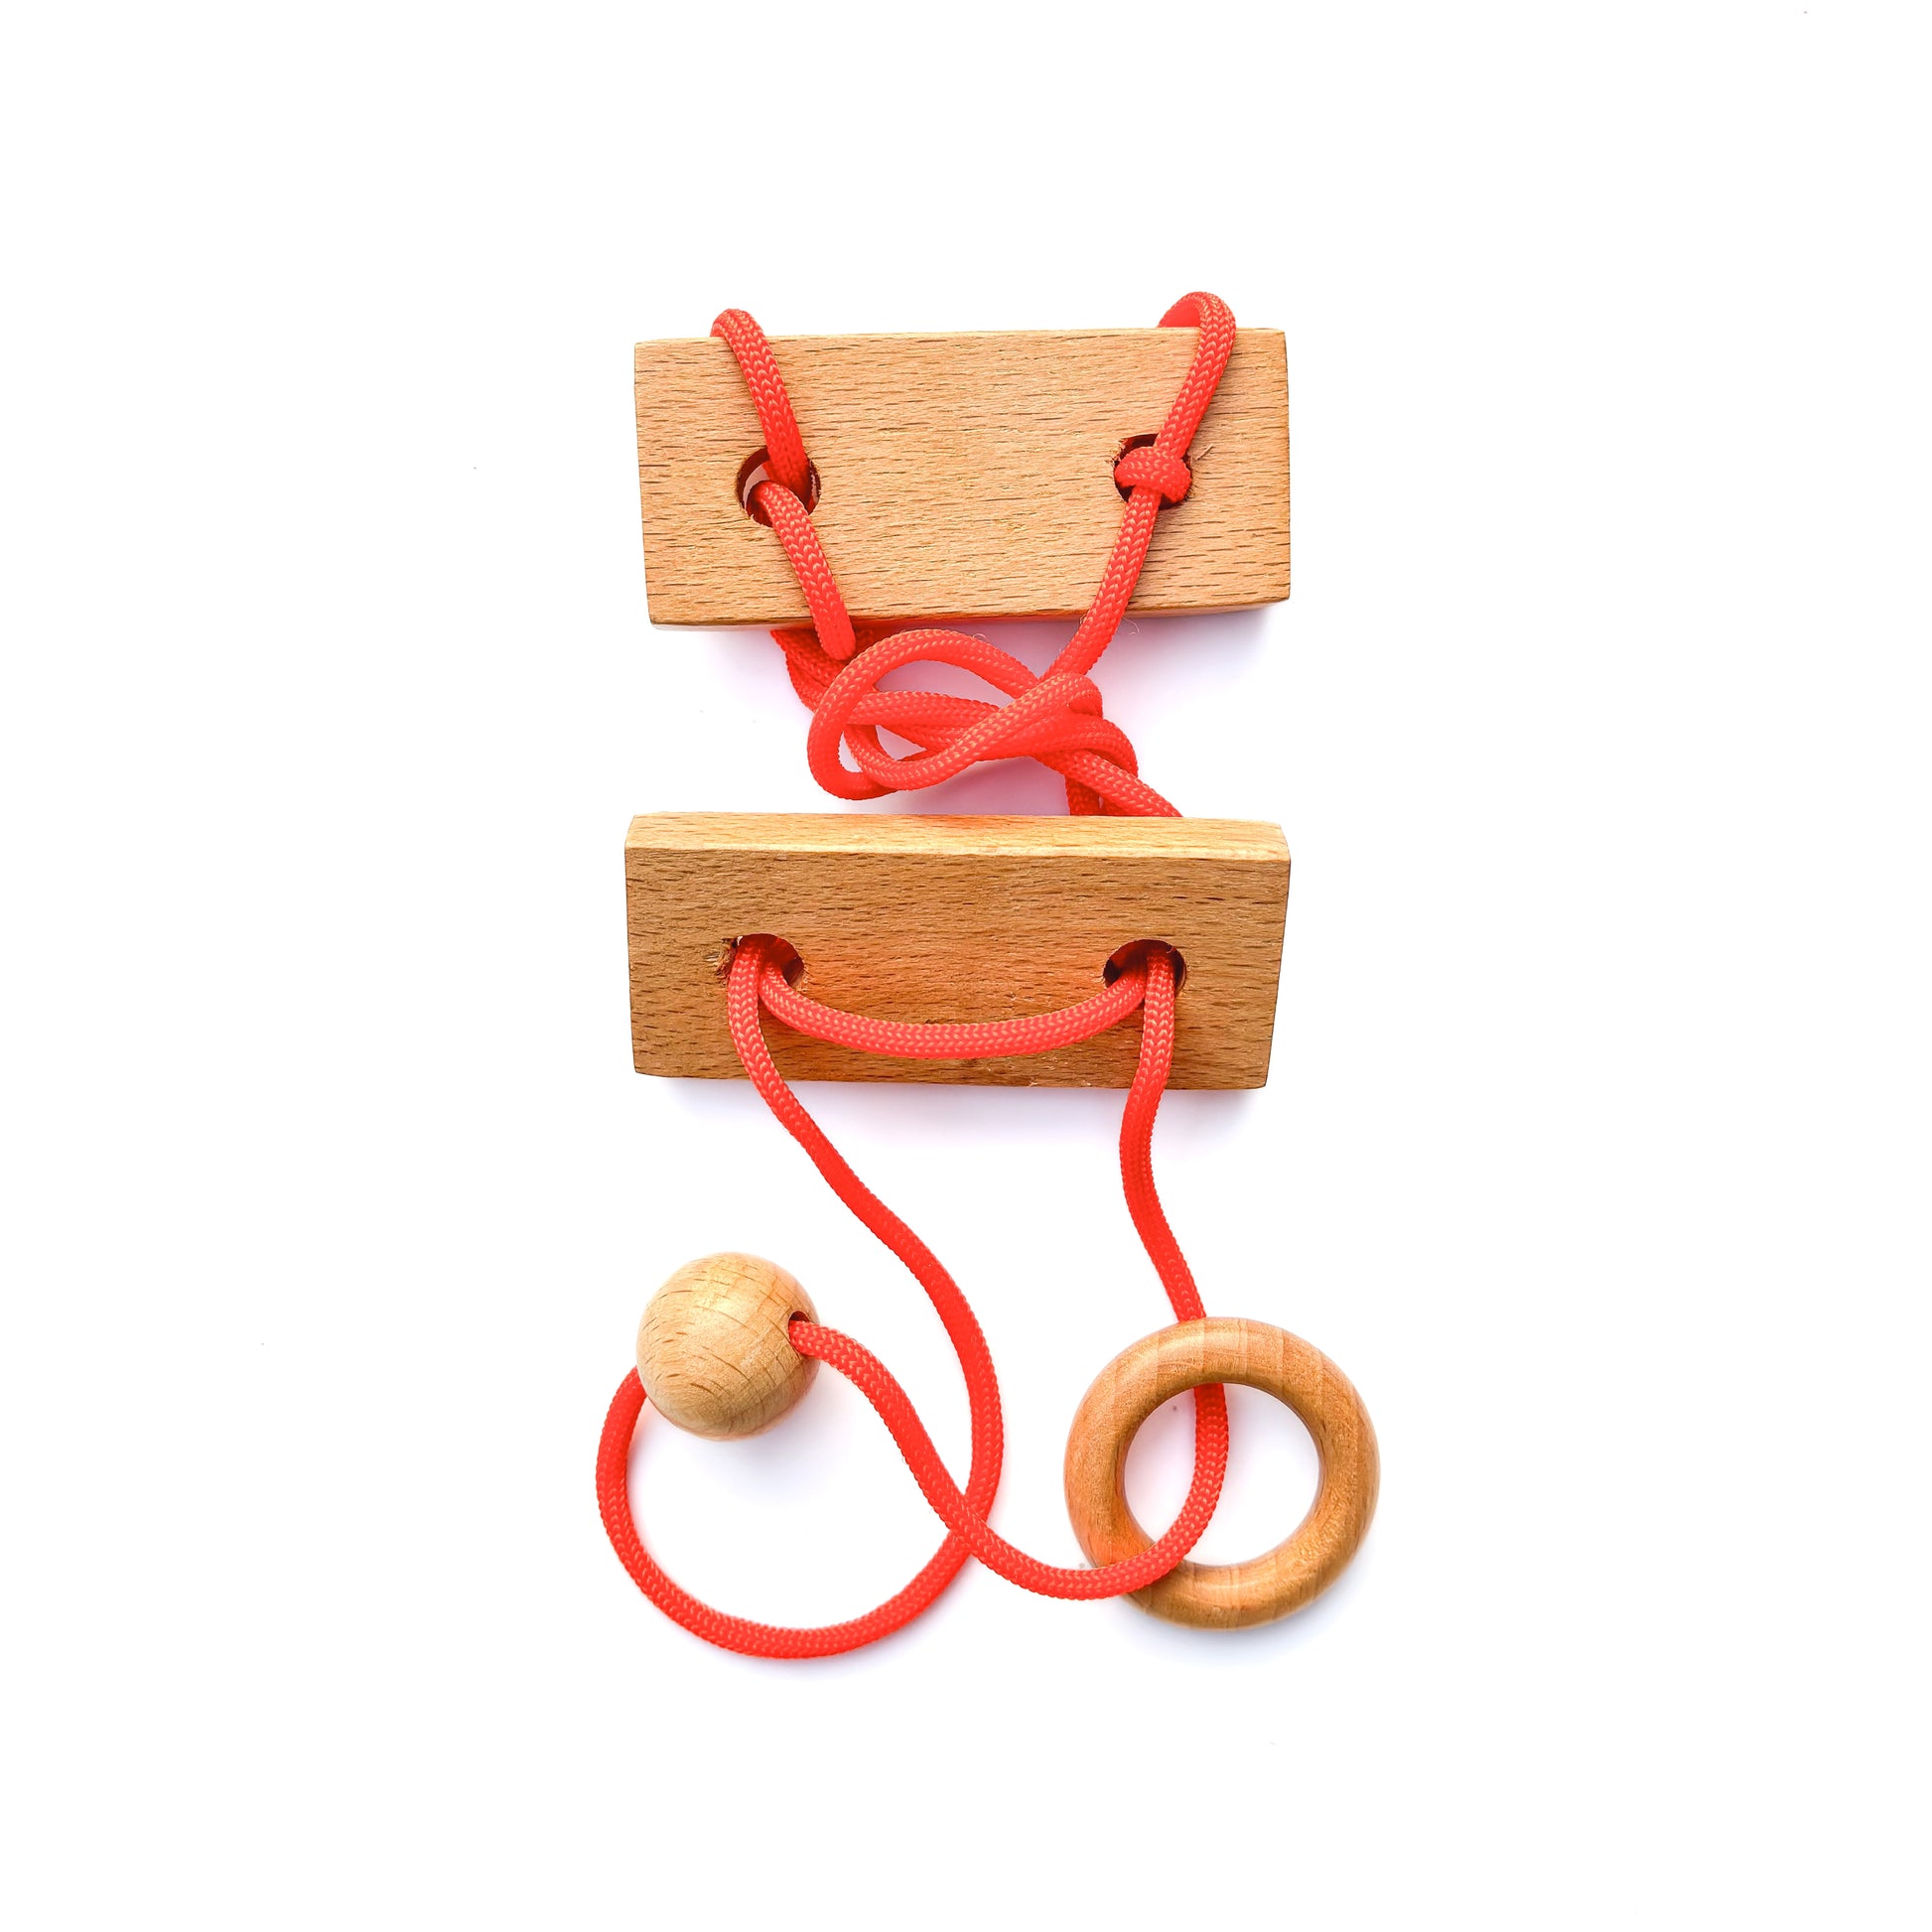 Wooden disentanglement String puzzle with red rope, ball, and ring on white background